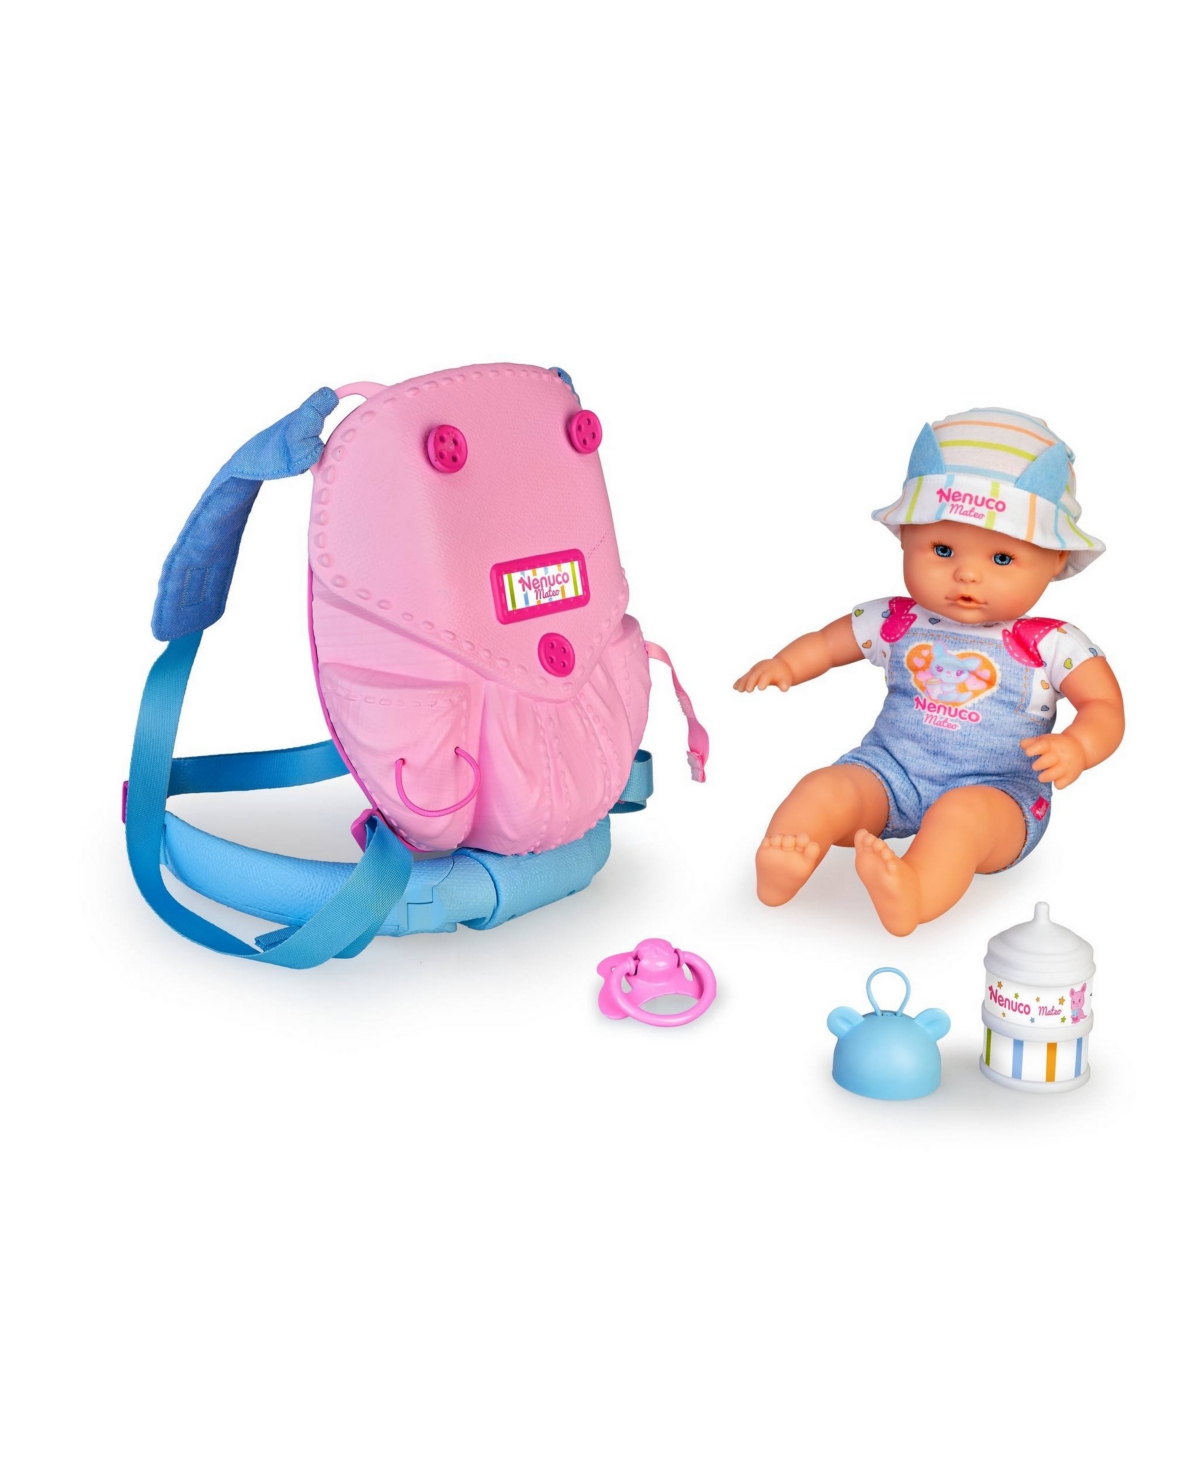 Nenuco Kids' Taking A Walk With Mateo Doll In Multicolor